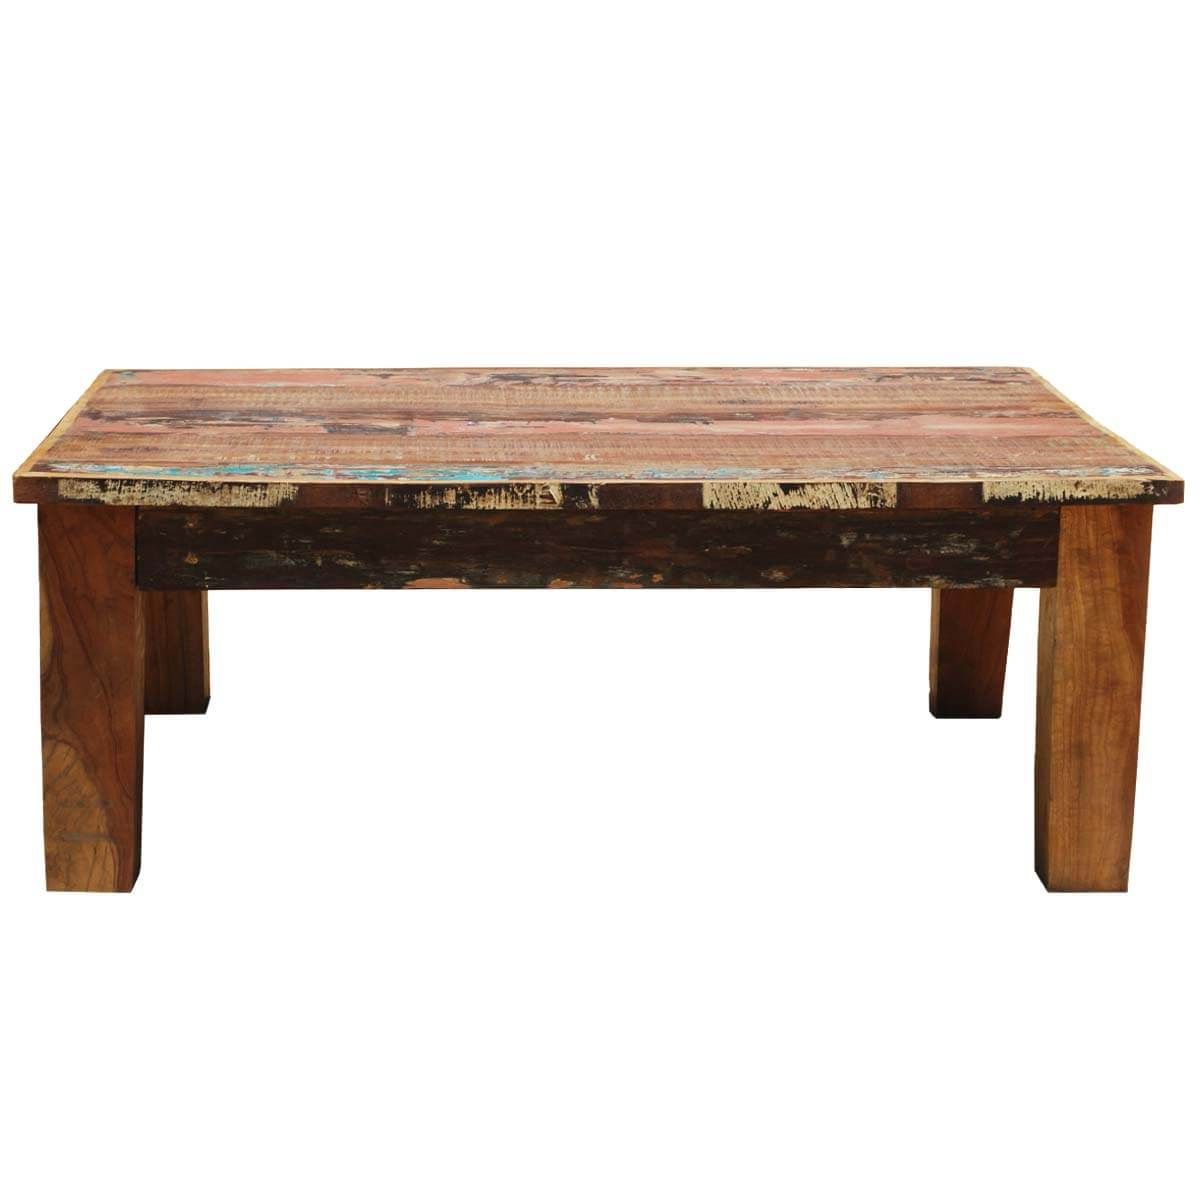 Culbertson Rustic Reclaimed Wood Rectangle Coffee Table With Well Known Barnwood Coffee Tables (Gallery 19 of 20)